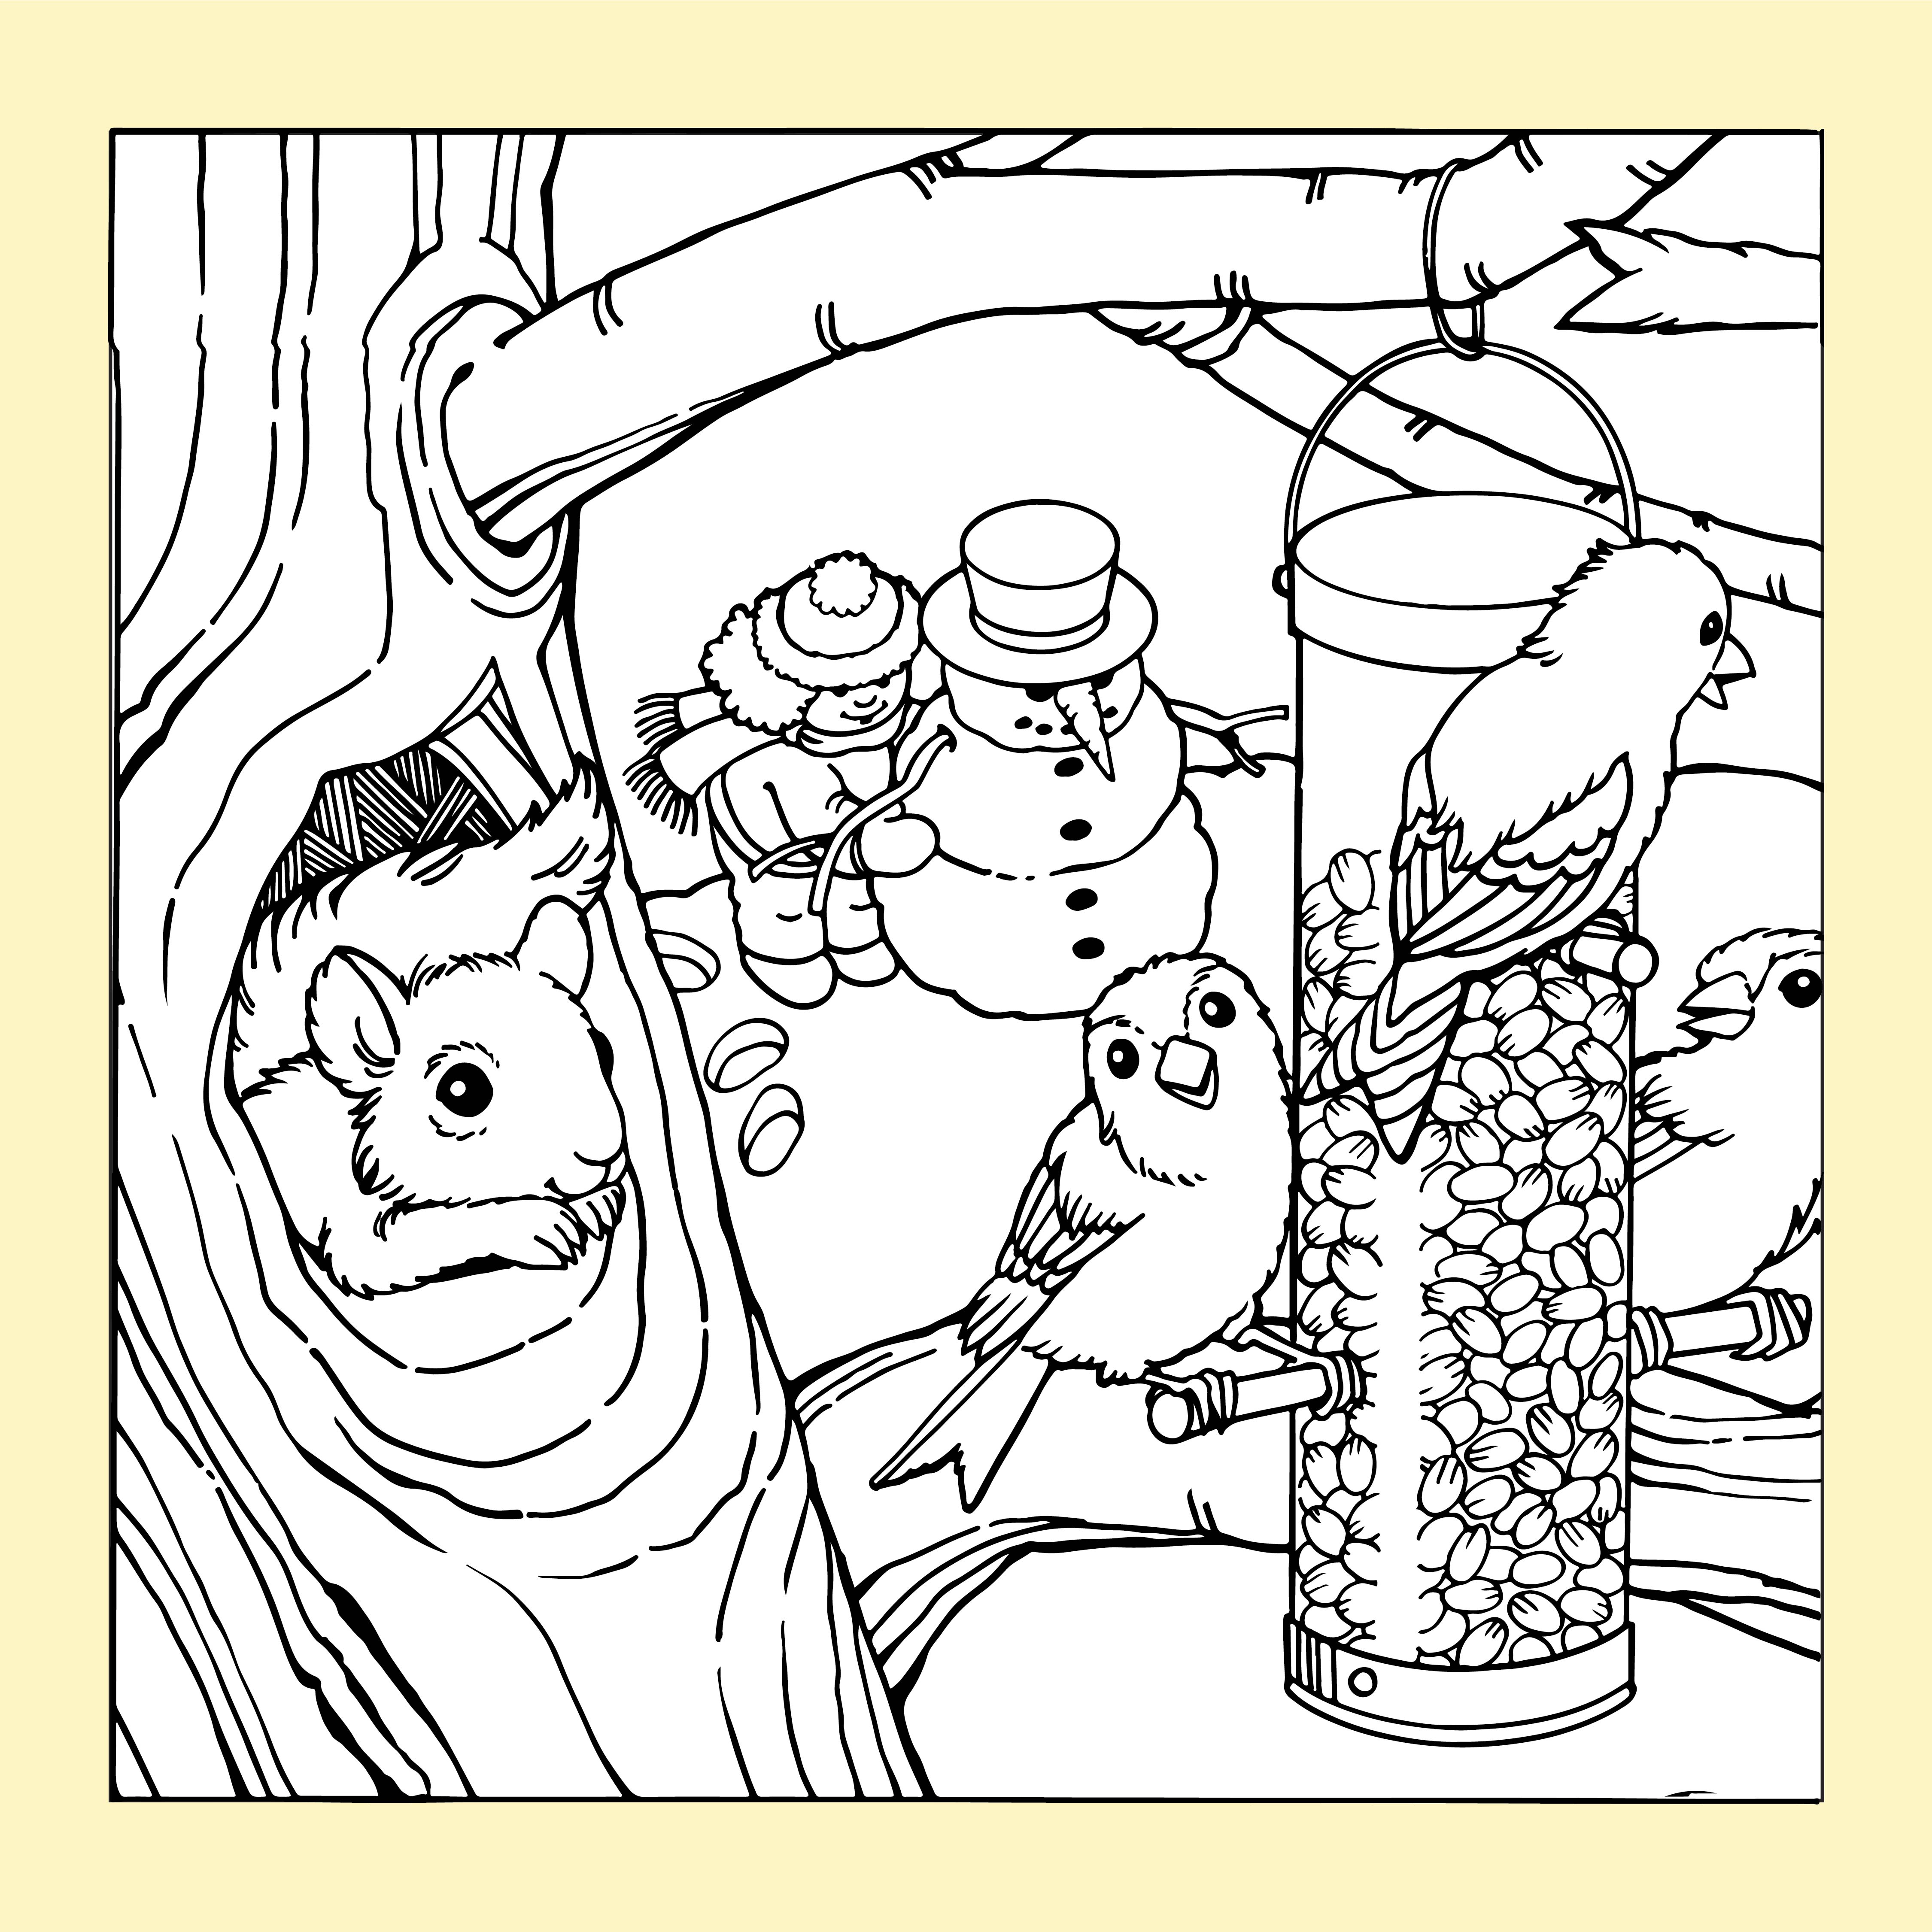 Printable Christmas Coloring Pages Adult